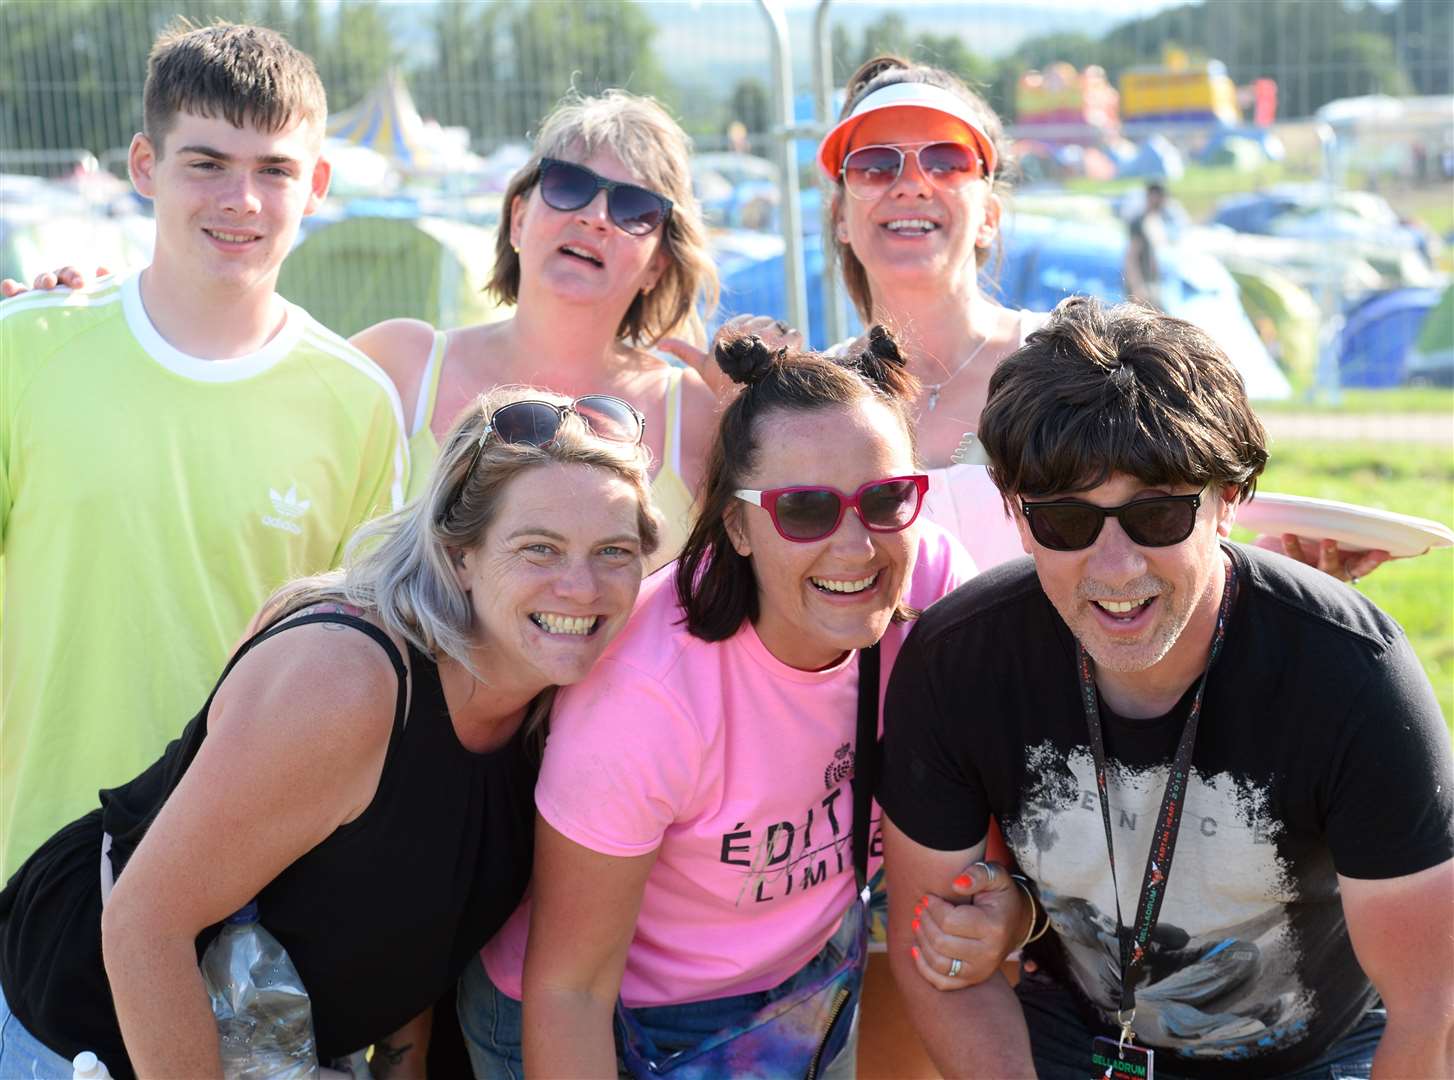 Belladrum 2019. Aiden and Laura Thomson, Marlene Forsythm Sarah Morrison with Nicola and Gordon Duthie. Picture: Gary Anthony. Image No.044555.